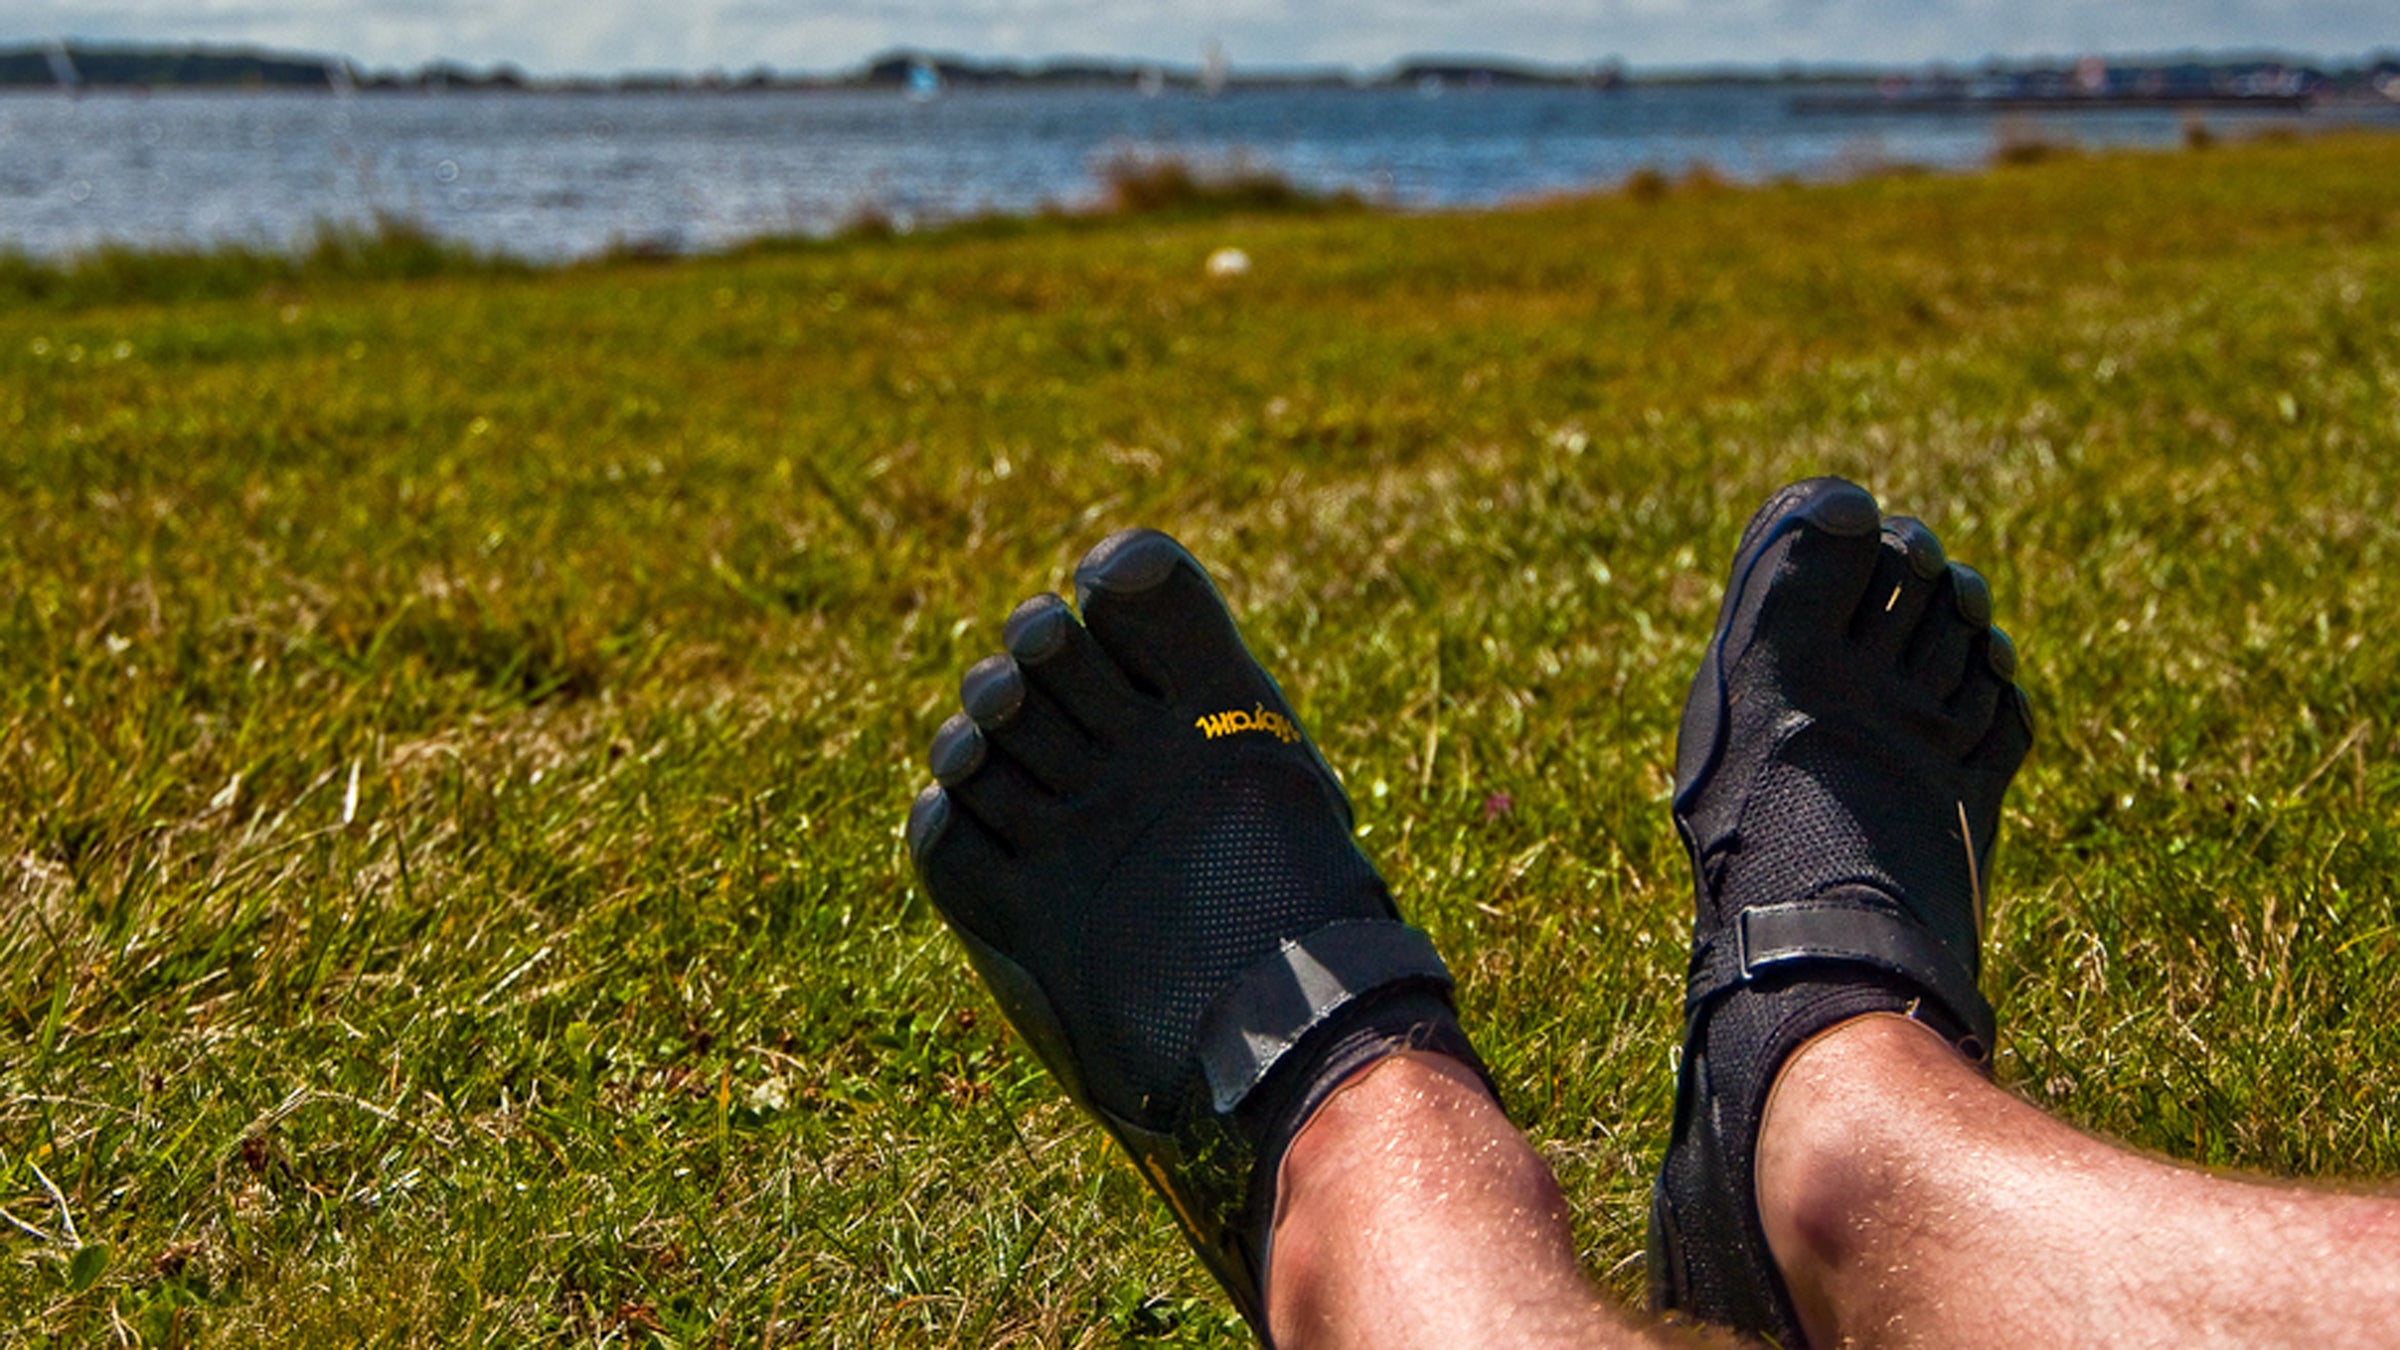 More Than 150,000 Claims Filed in Vibram FiveFingers Lawsuit